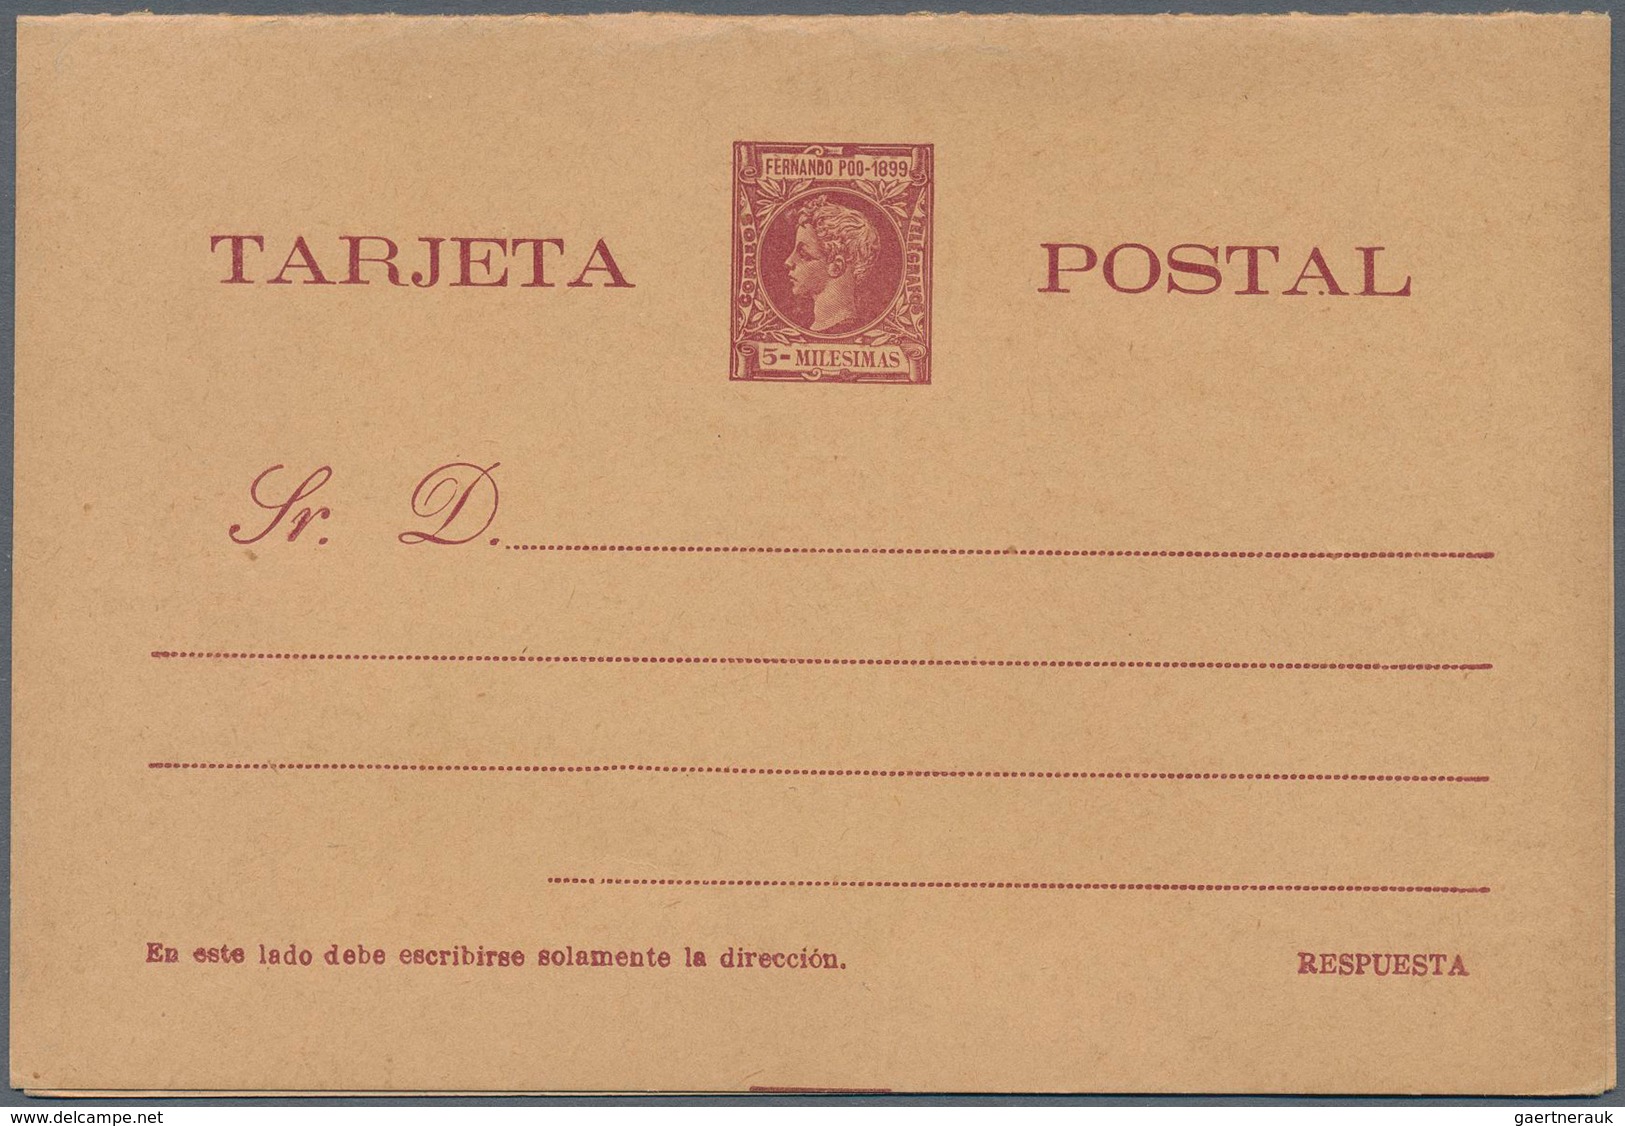 Spanien - Ganzsachen: 1899. Lot Of 4 Reply Cards Alfonso XIII Infante "Fernando Poo-1899": One Card - 1850-1931